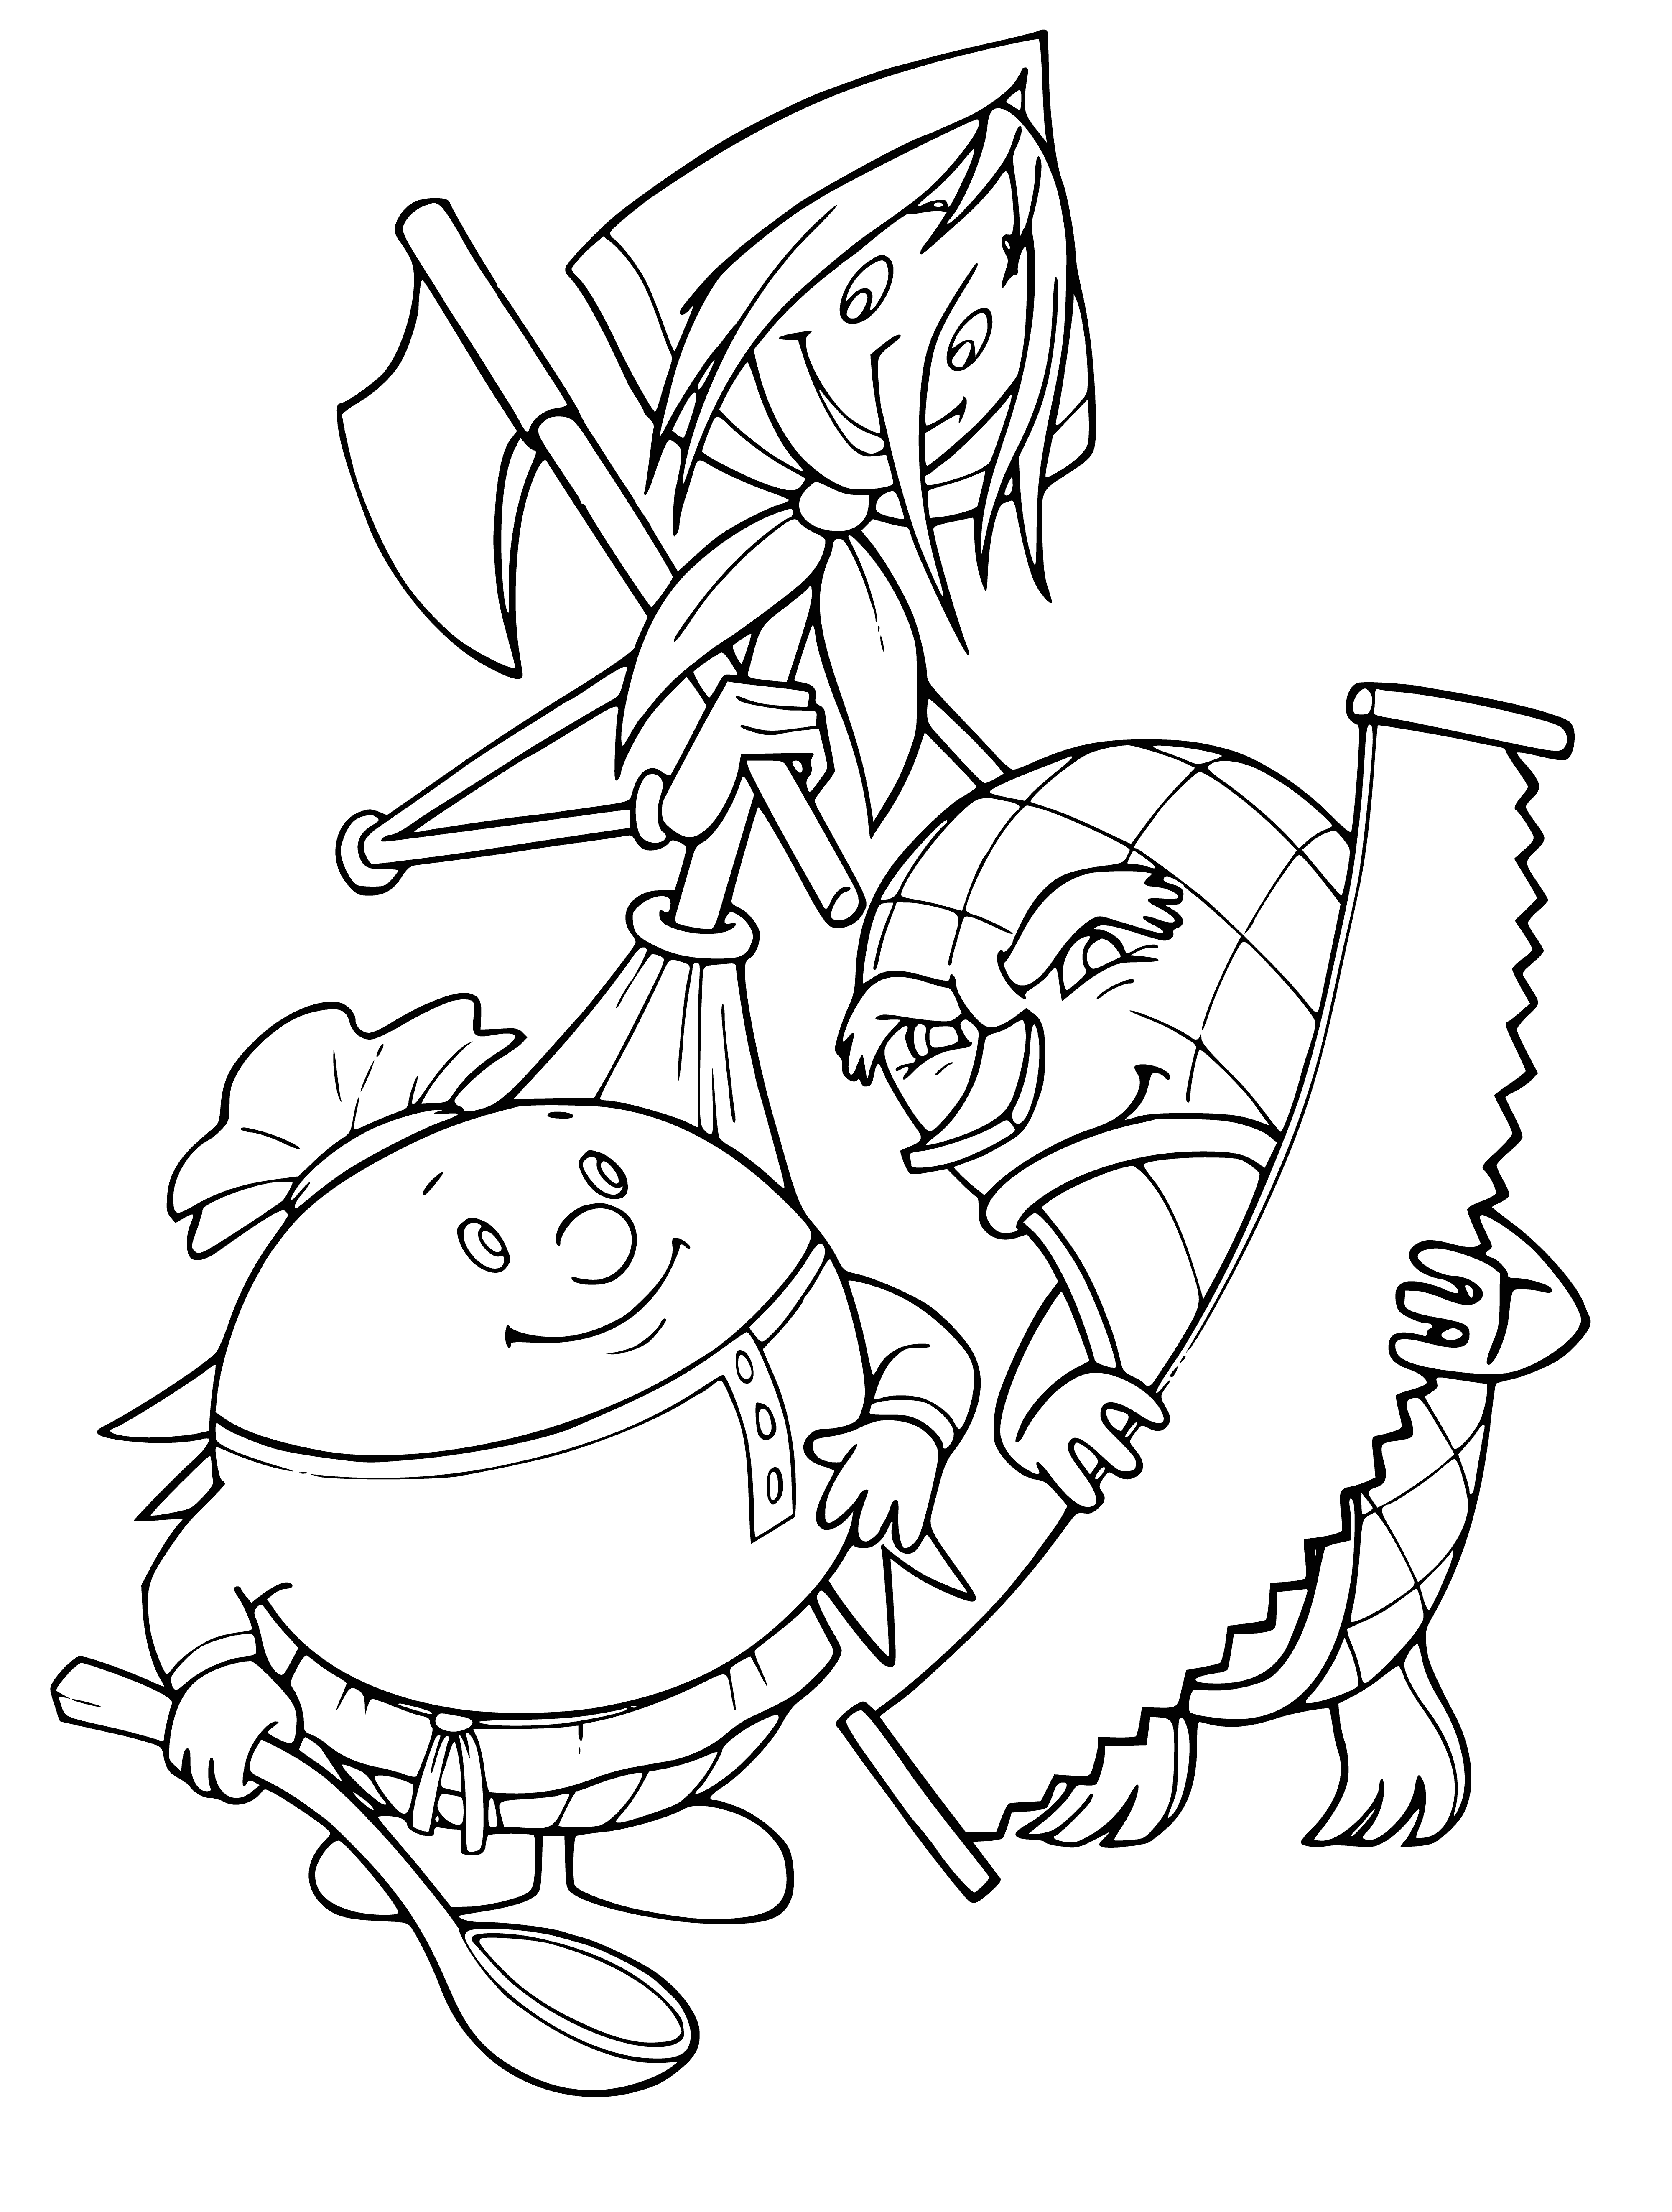 coloring page: 3 folk tales in coloring page: Bubble blws big bubble, Straw takes baby on magical journey and Bast, the leader of the farm.